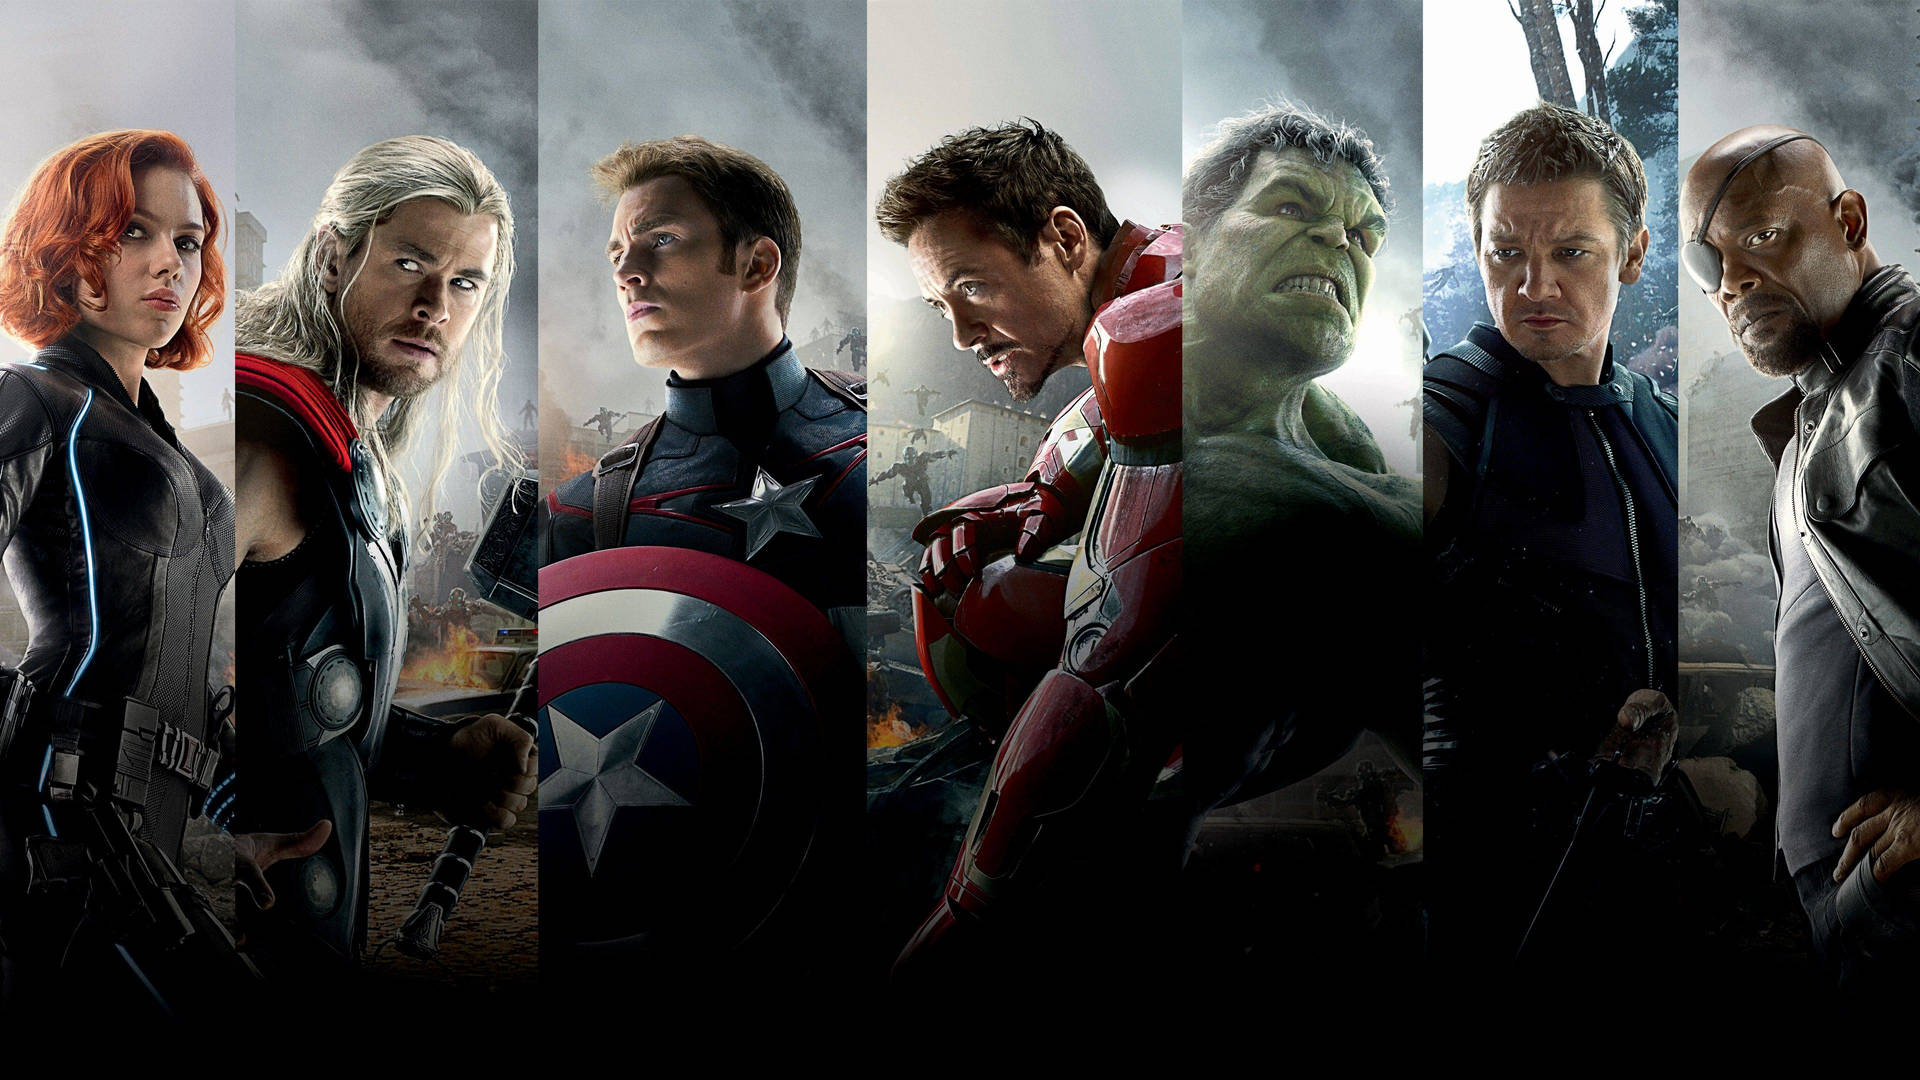 Ensemble of The Avengers in Action Wallpaper